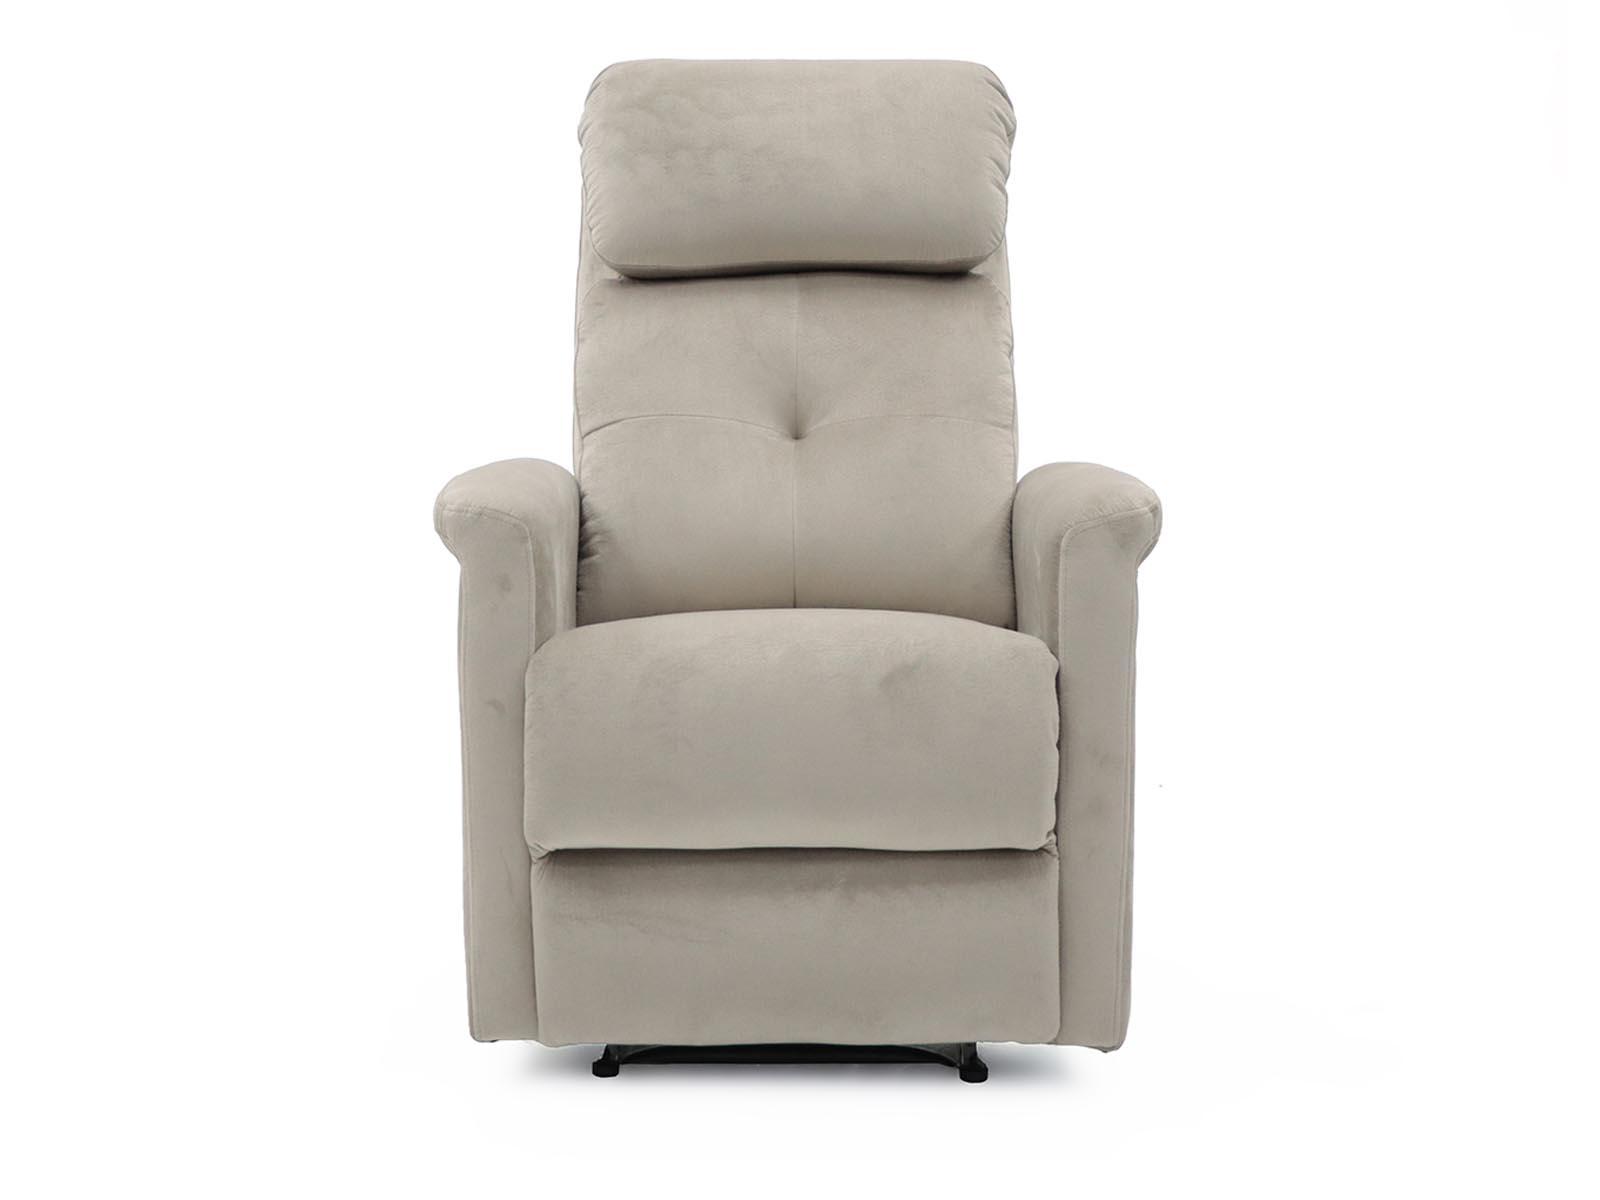 Mobistoxx Relaxfauteuil manueel LINCOLN taupe